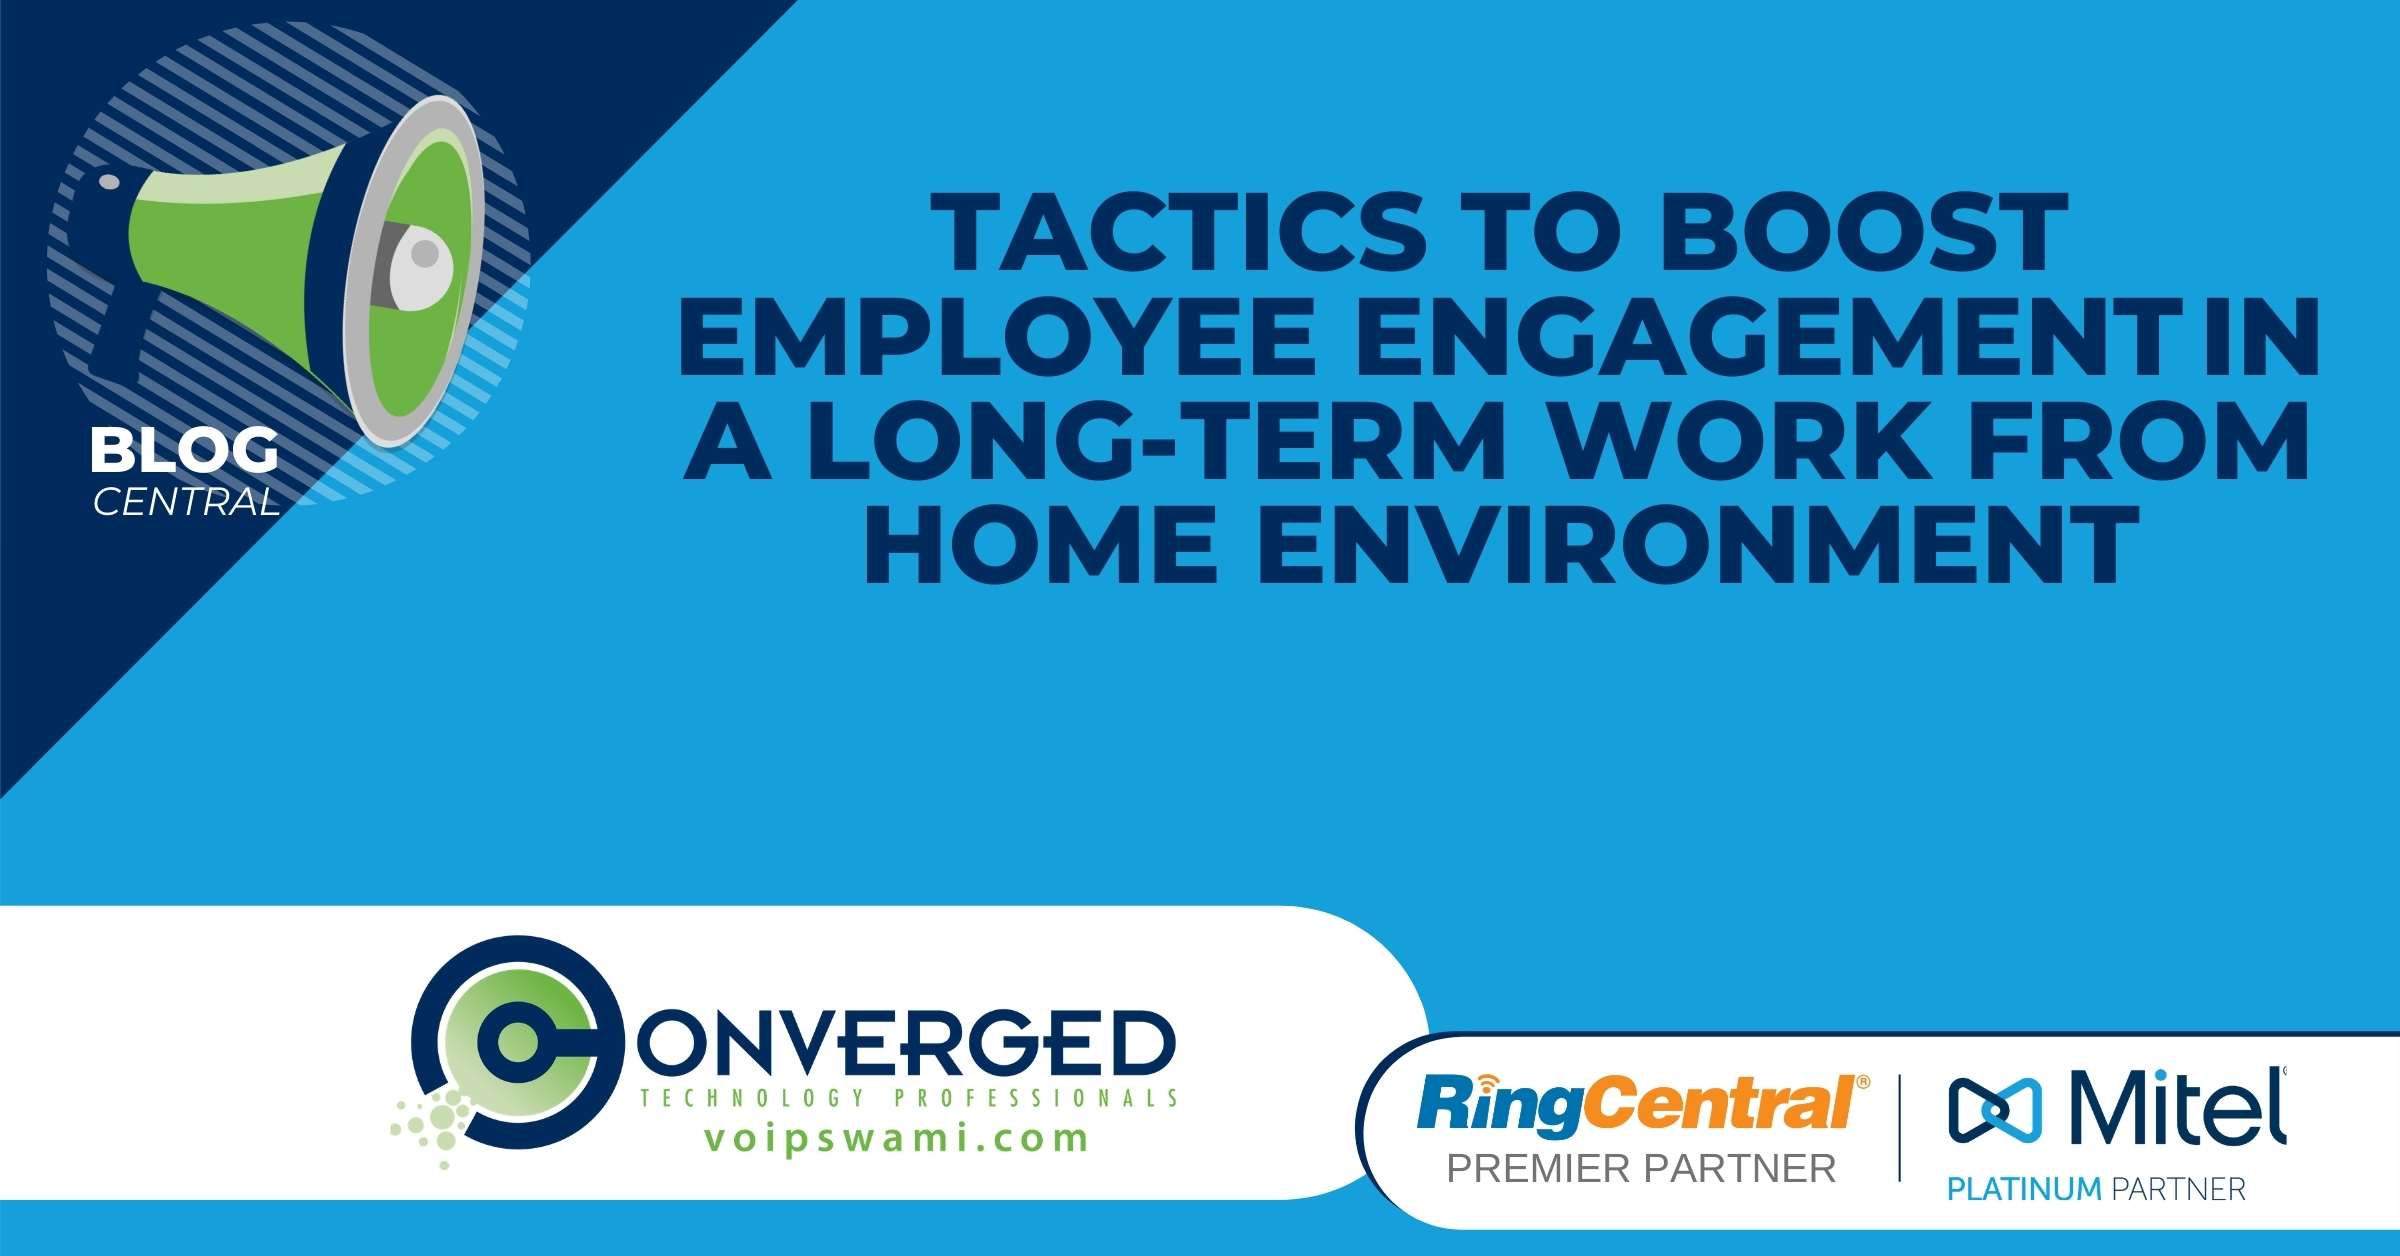 Tactics to Boost Employee Engagement in a Long-Term Work from Home Environment  